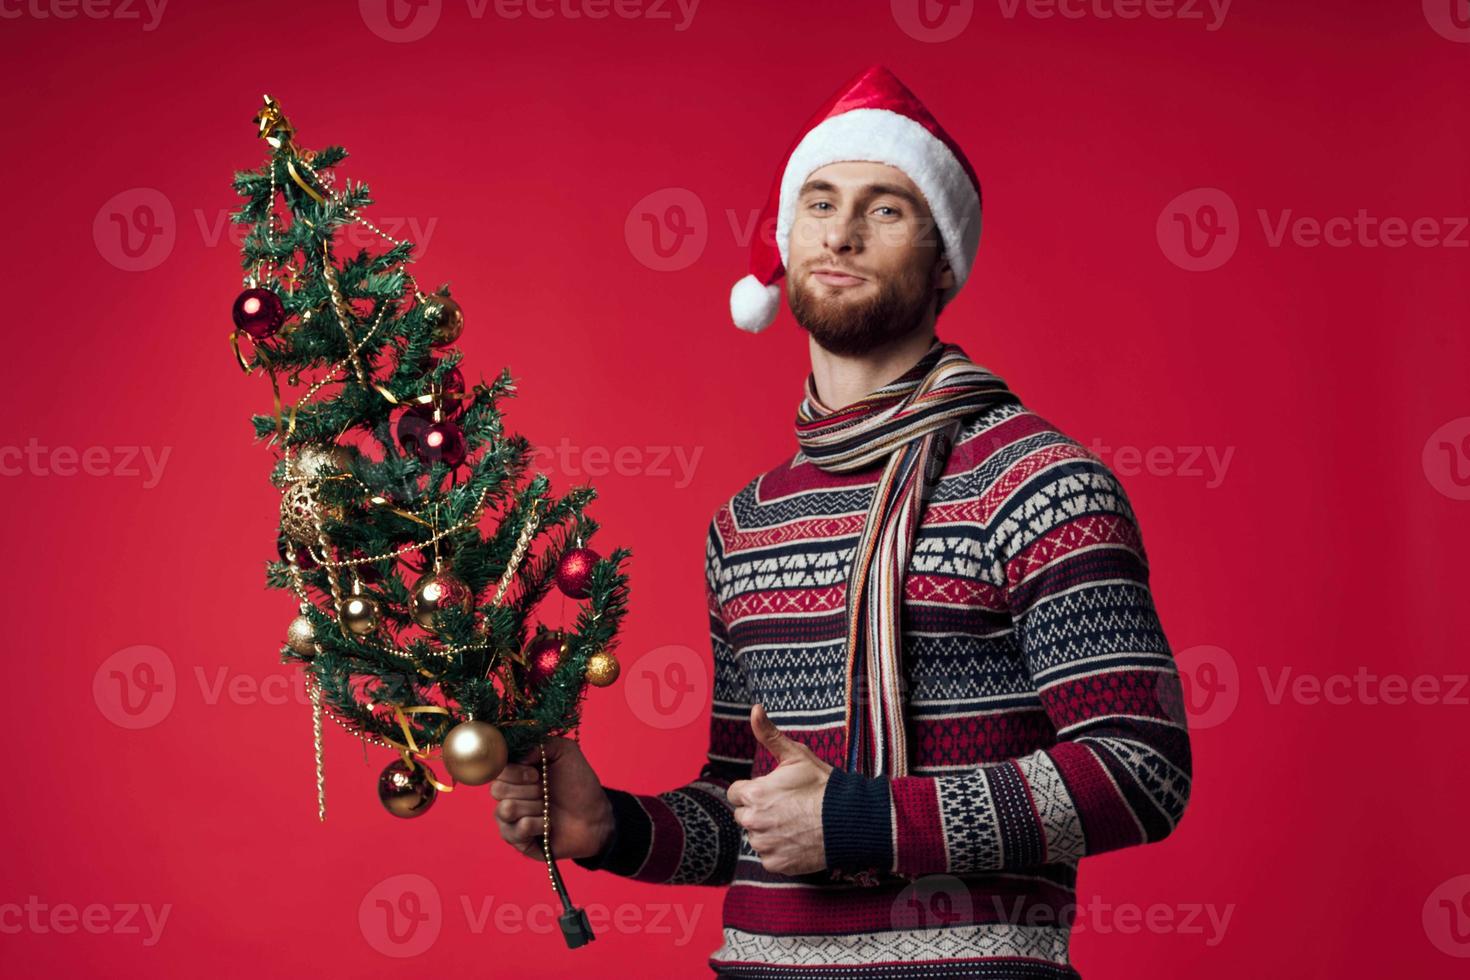 man in New Year's clothes Christmas tree emotions holiday decoration photo